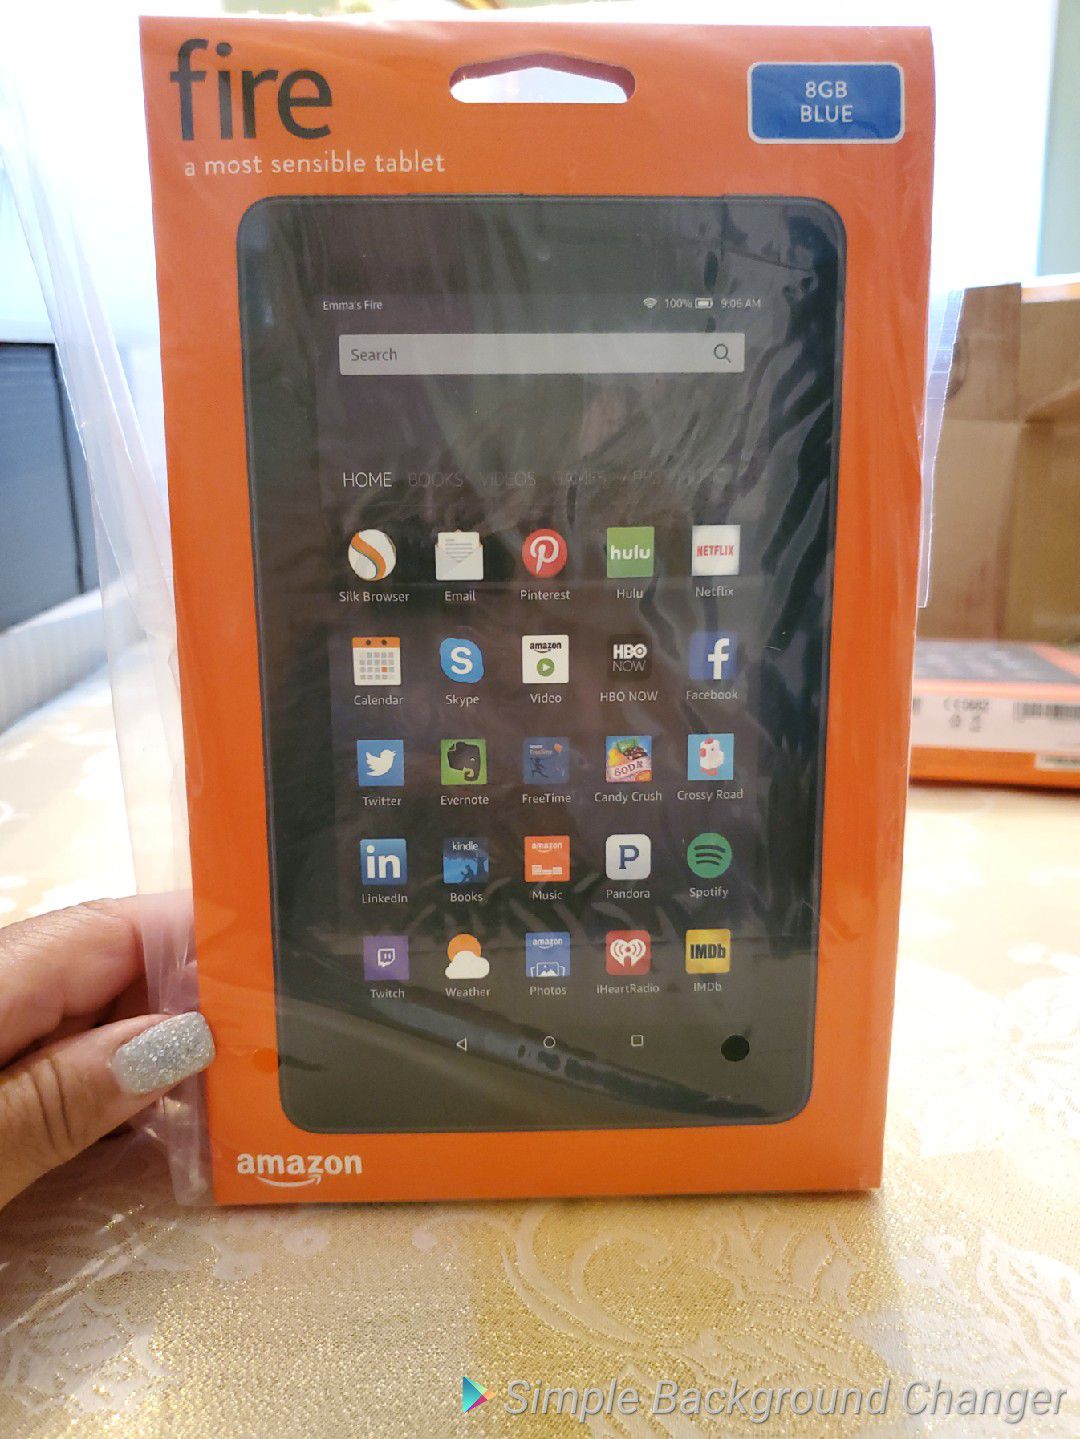 Amazon Fire Tablet 7 inch screen and will include Clear protective Case